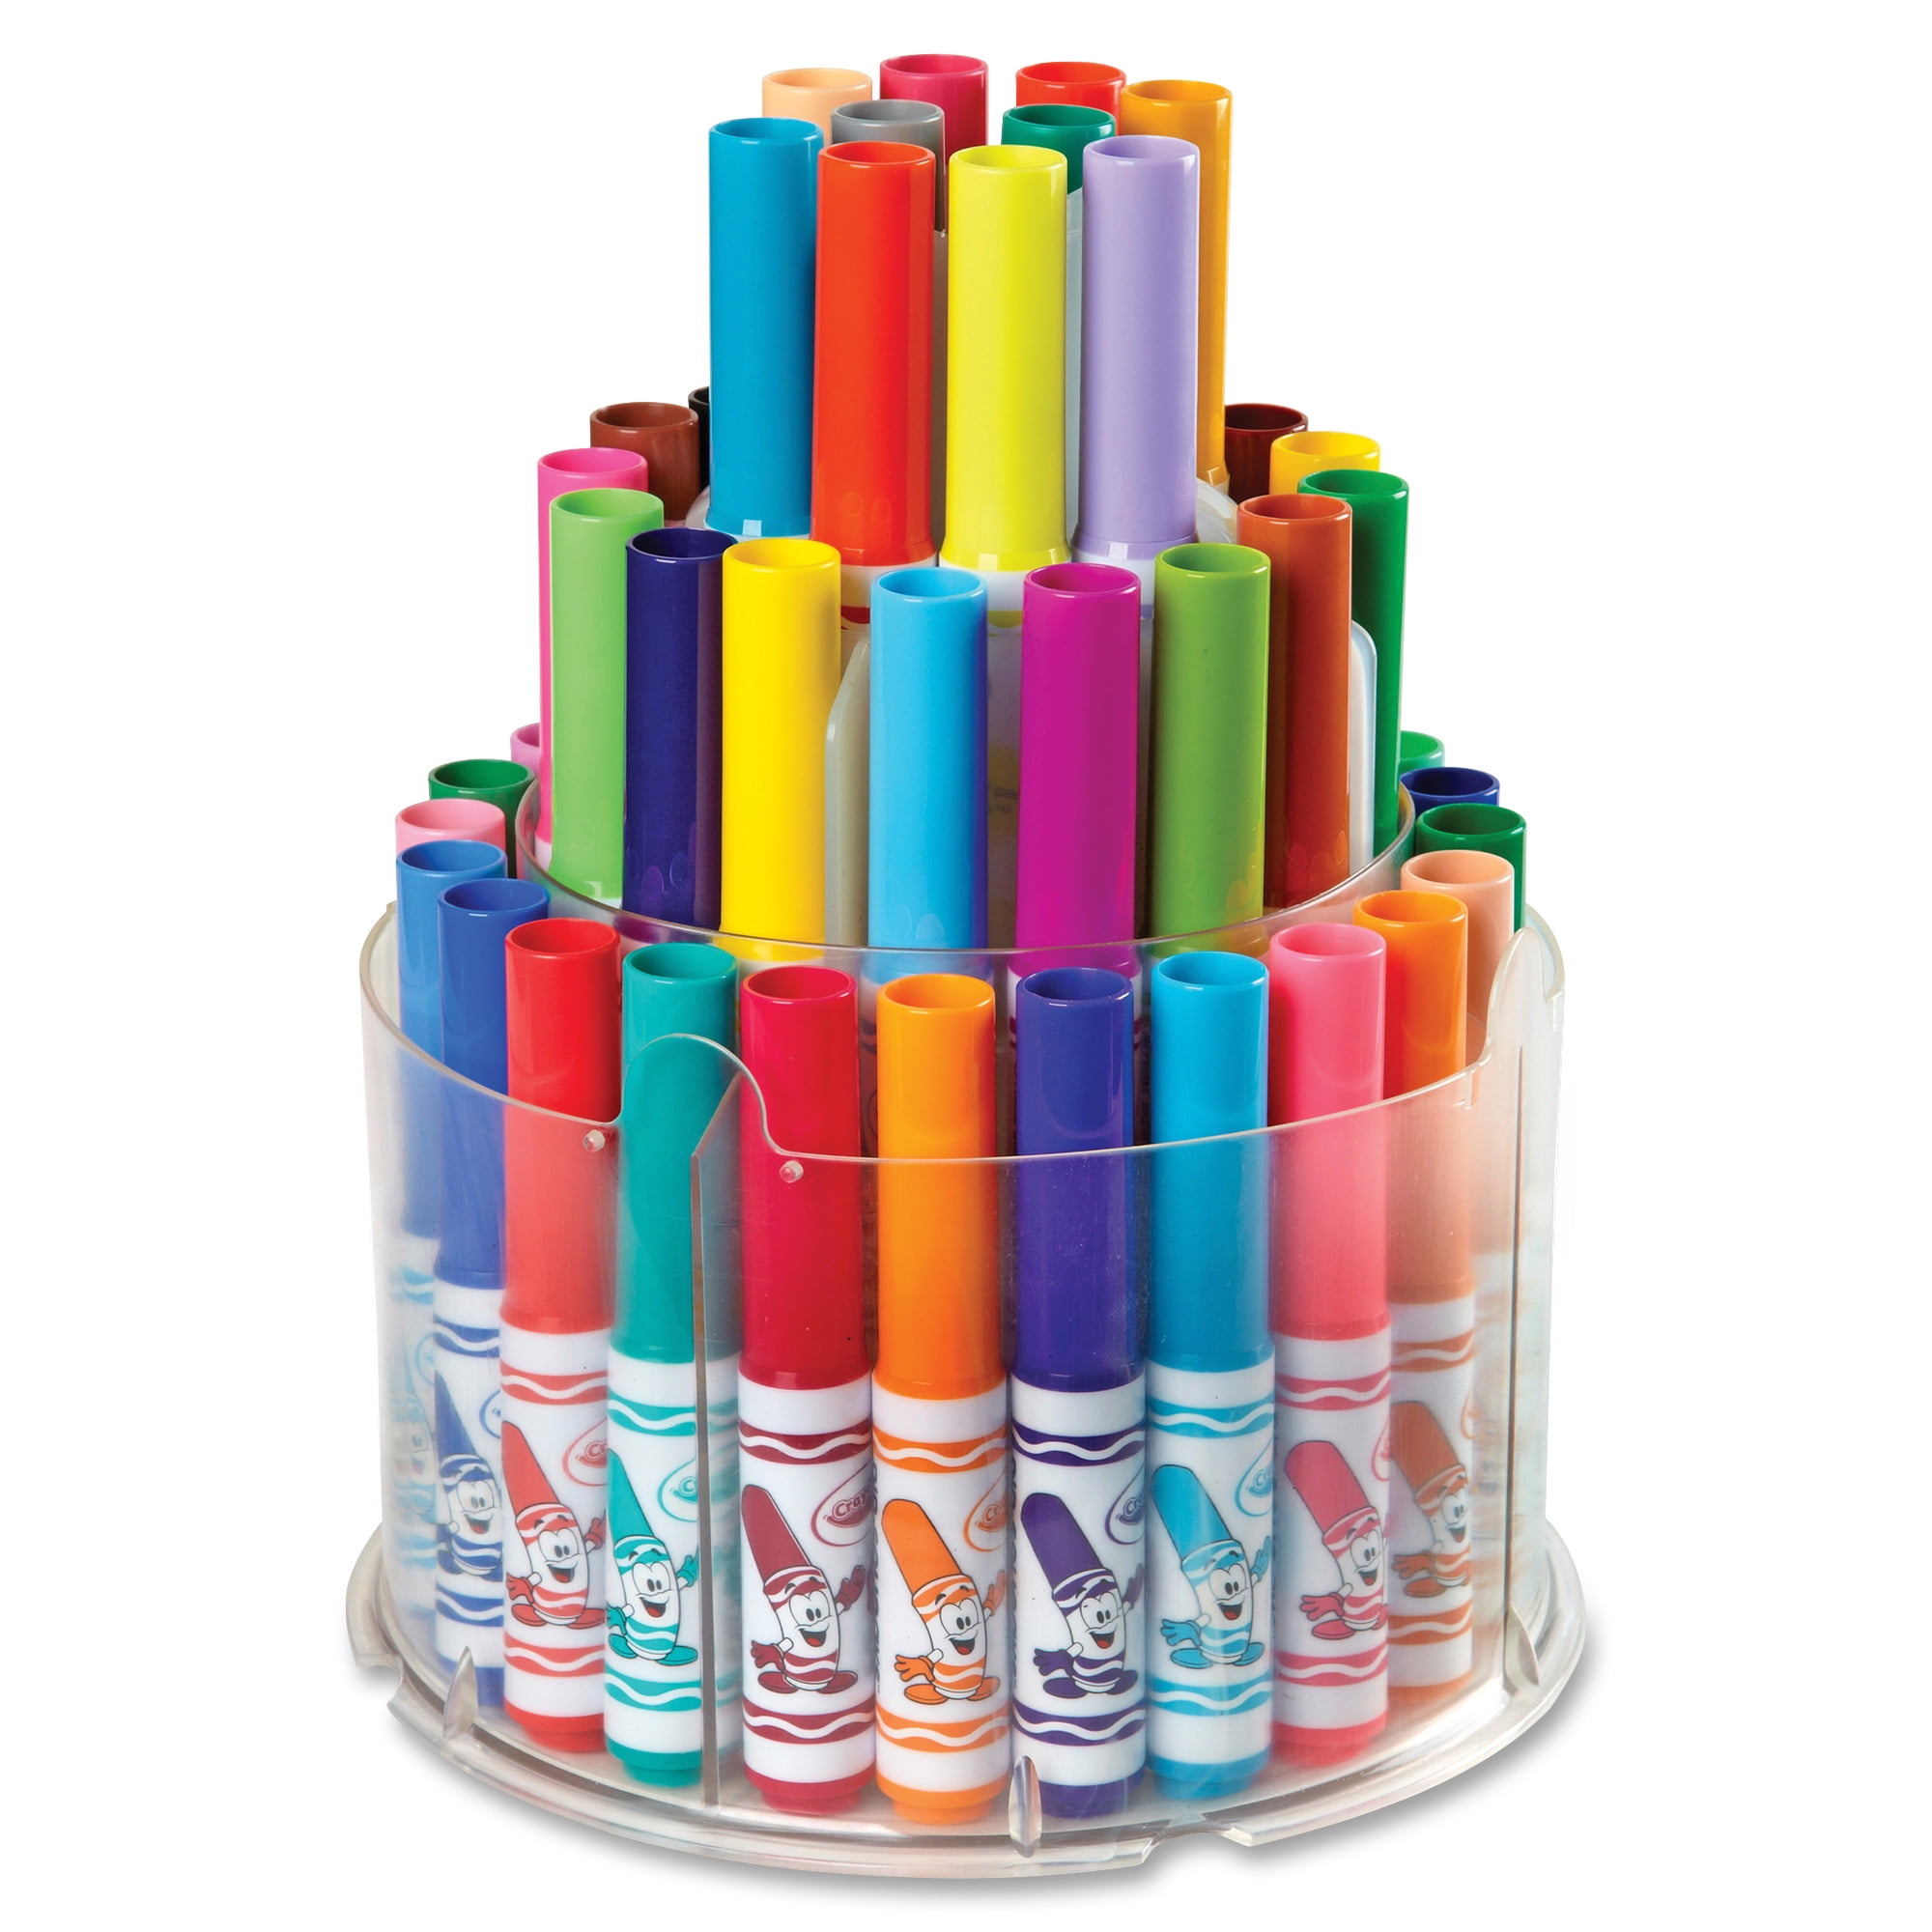 Crayola Pip Squeaks Marker Set, Washable Mini Markers, 64 Count